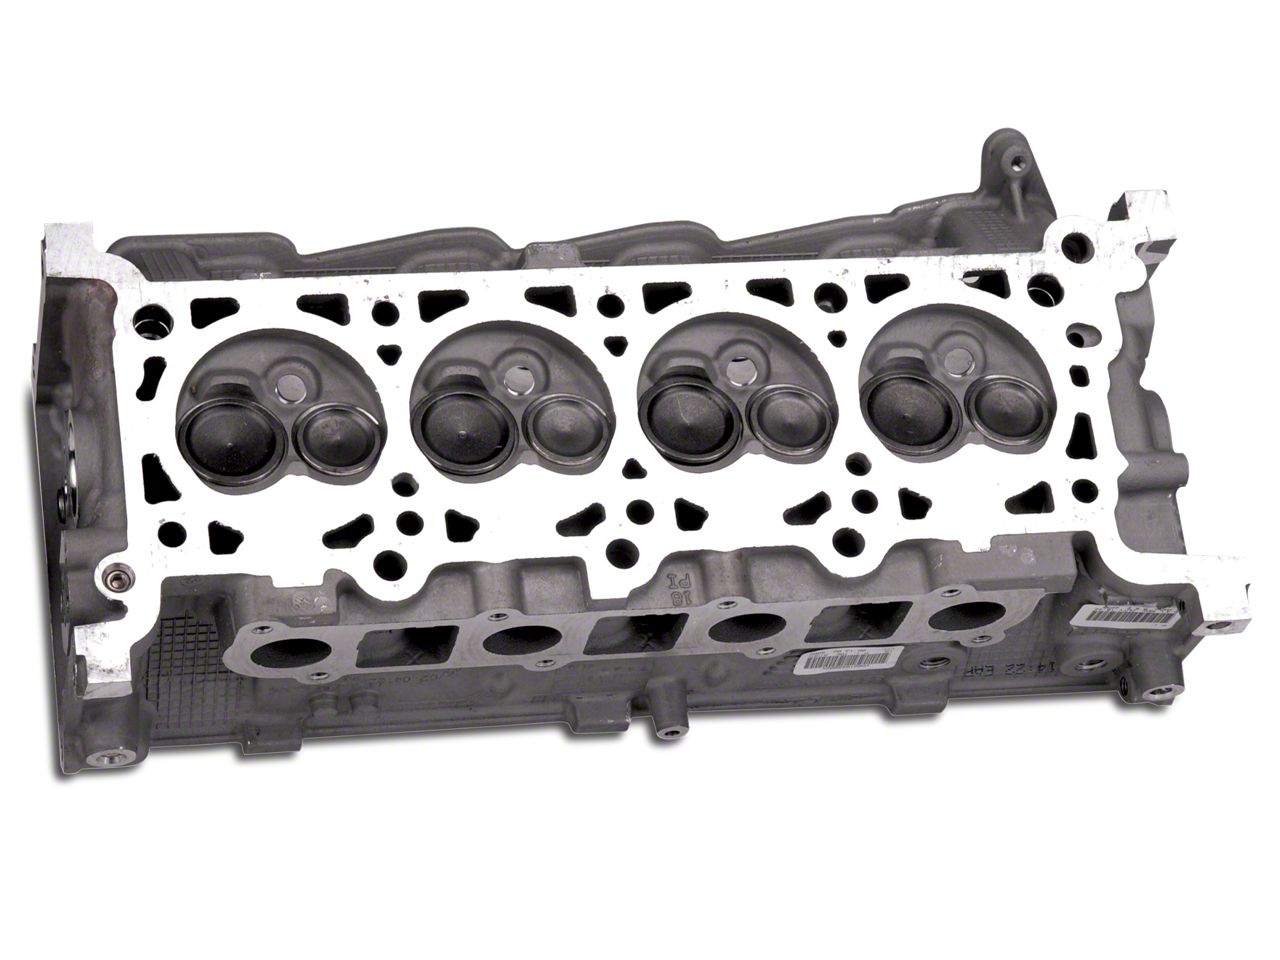 Mustang Cylinder Heads & Valvetrain Components 1964-1973